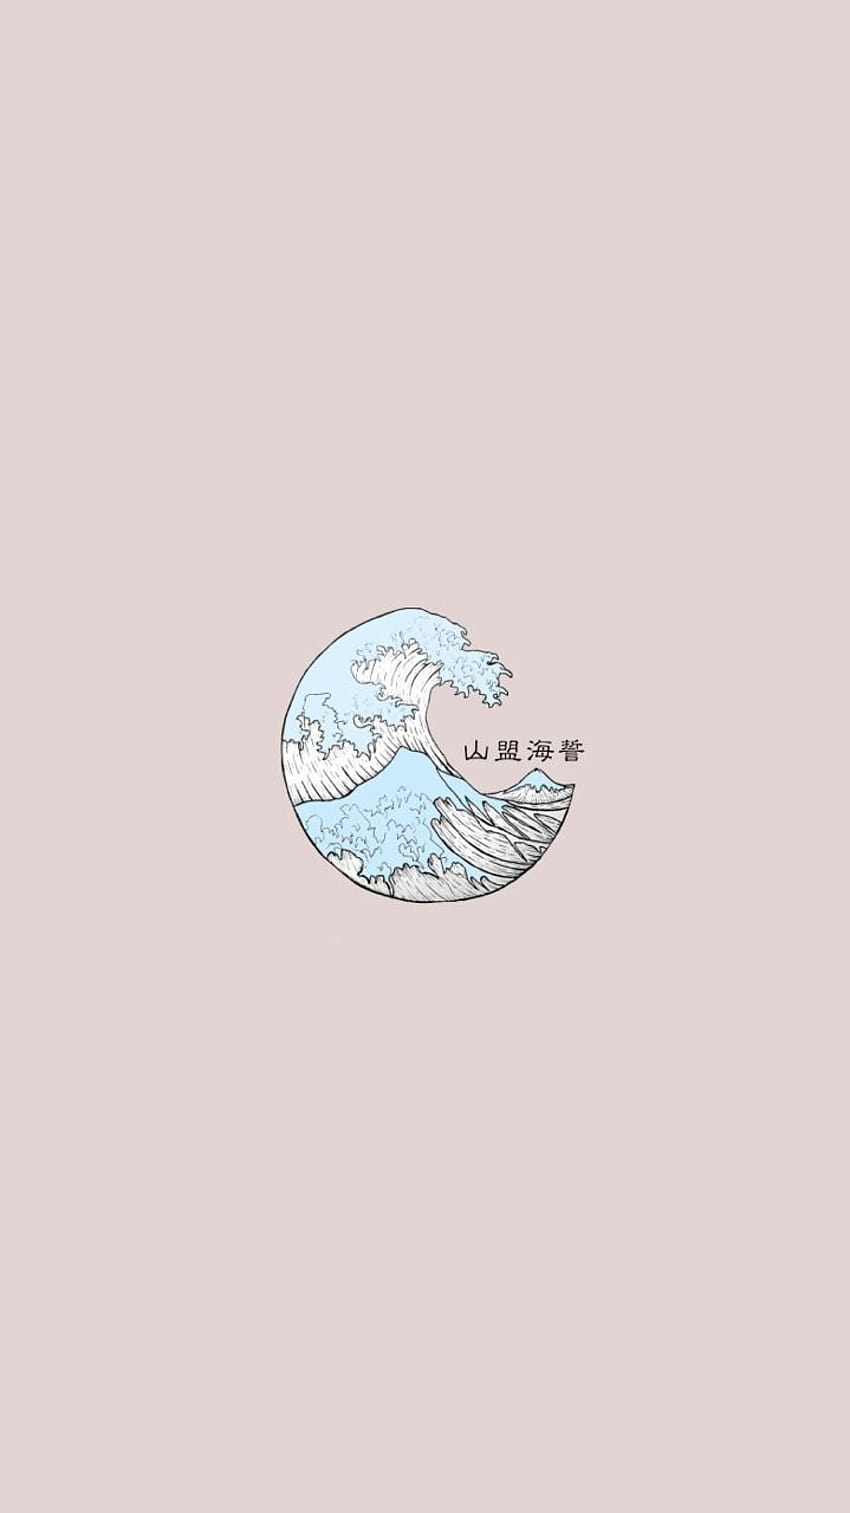 Aesthetic phone wallpaper of a wave - Doodles, The Great Wave off Kanagawa